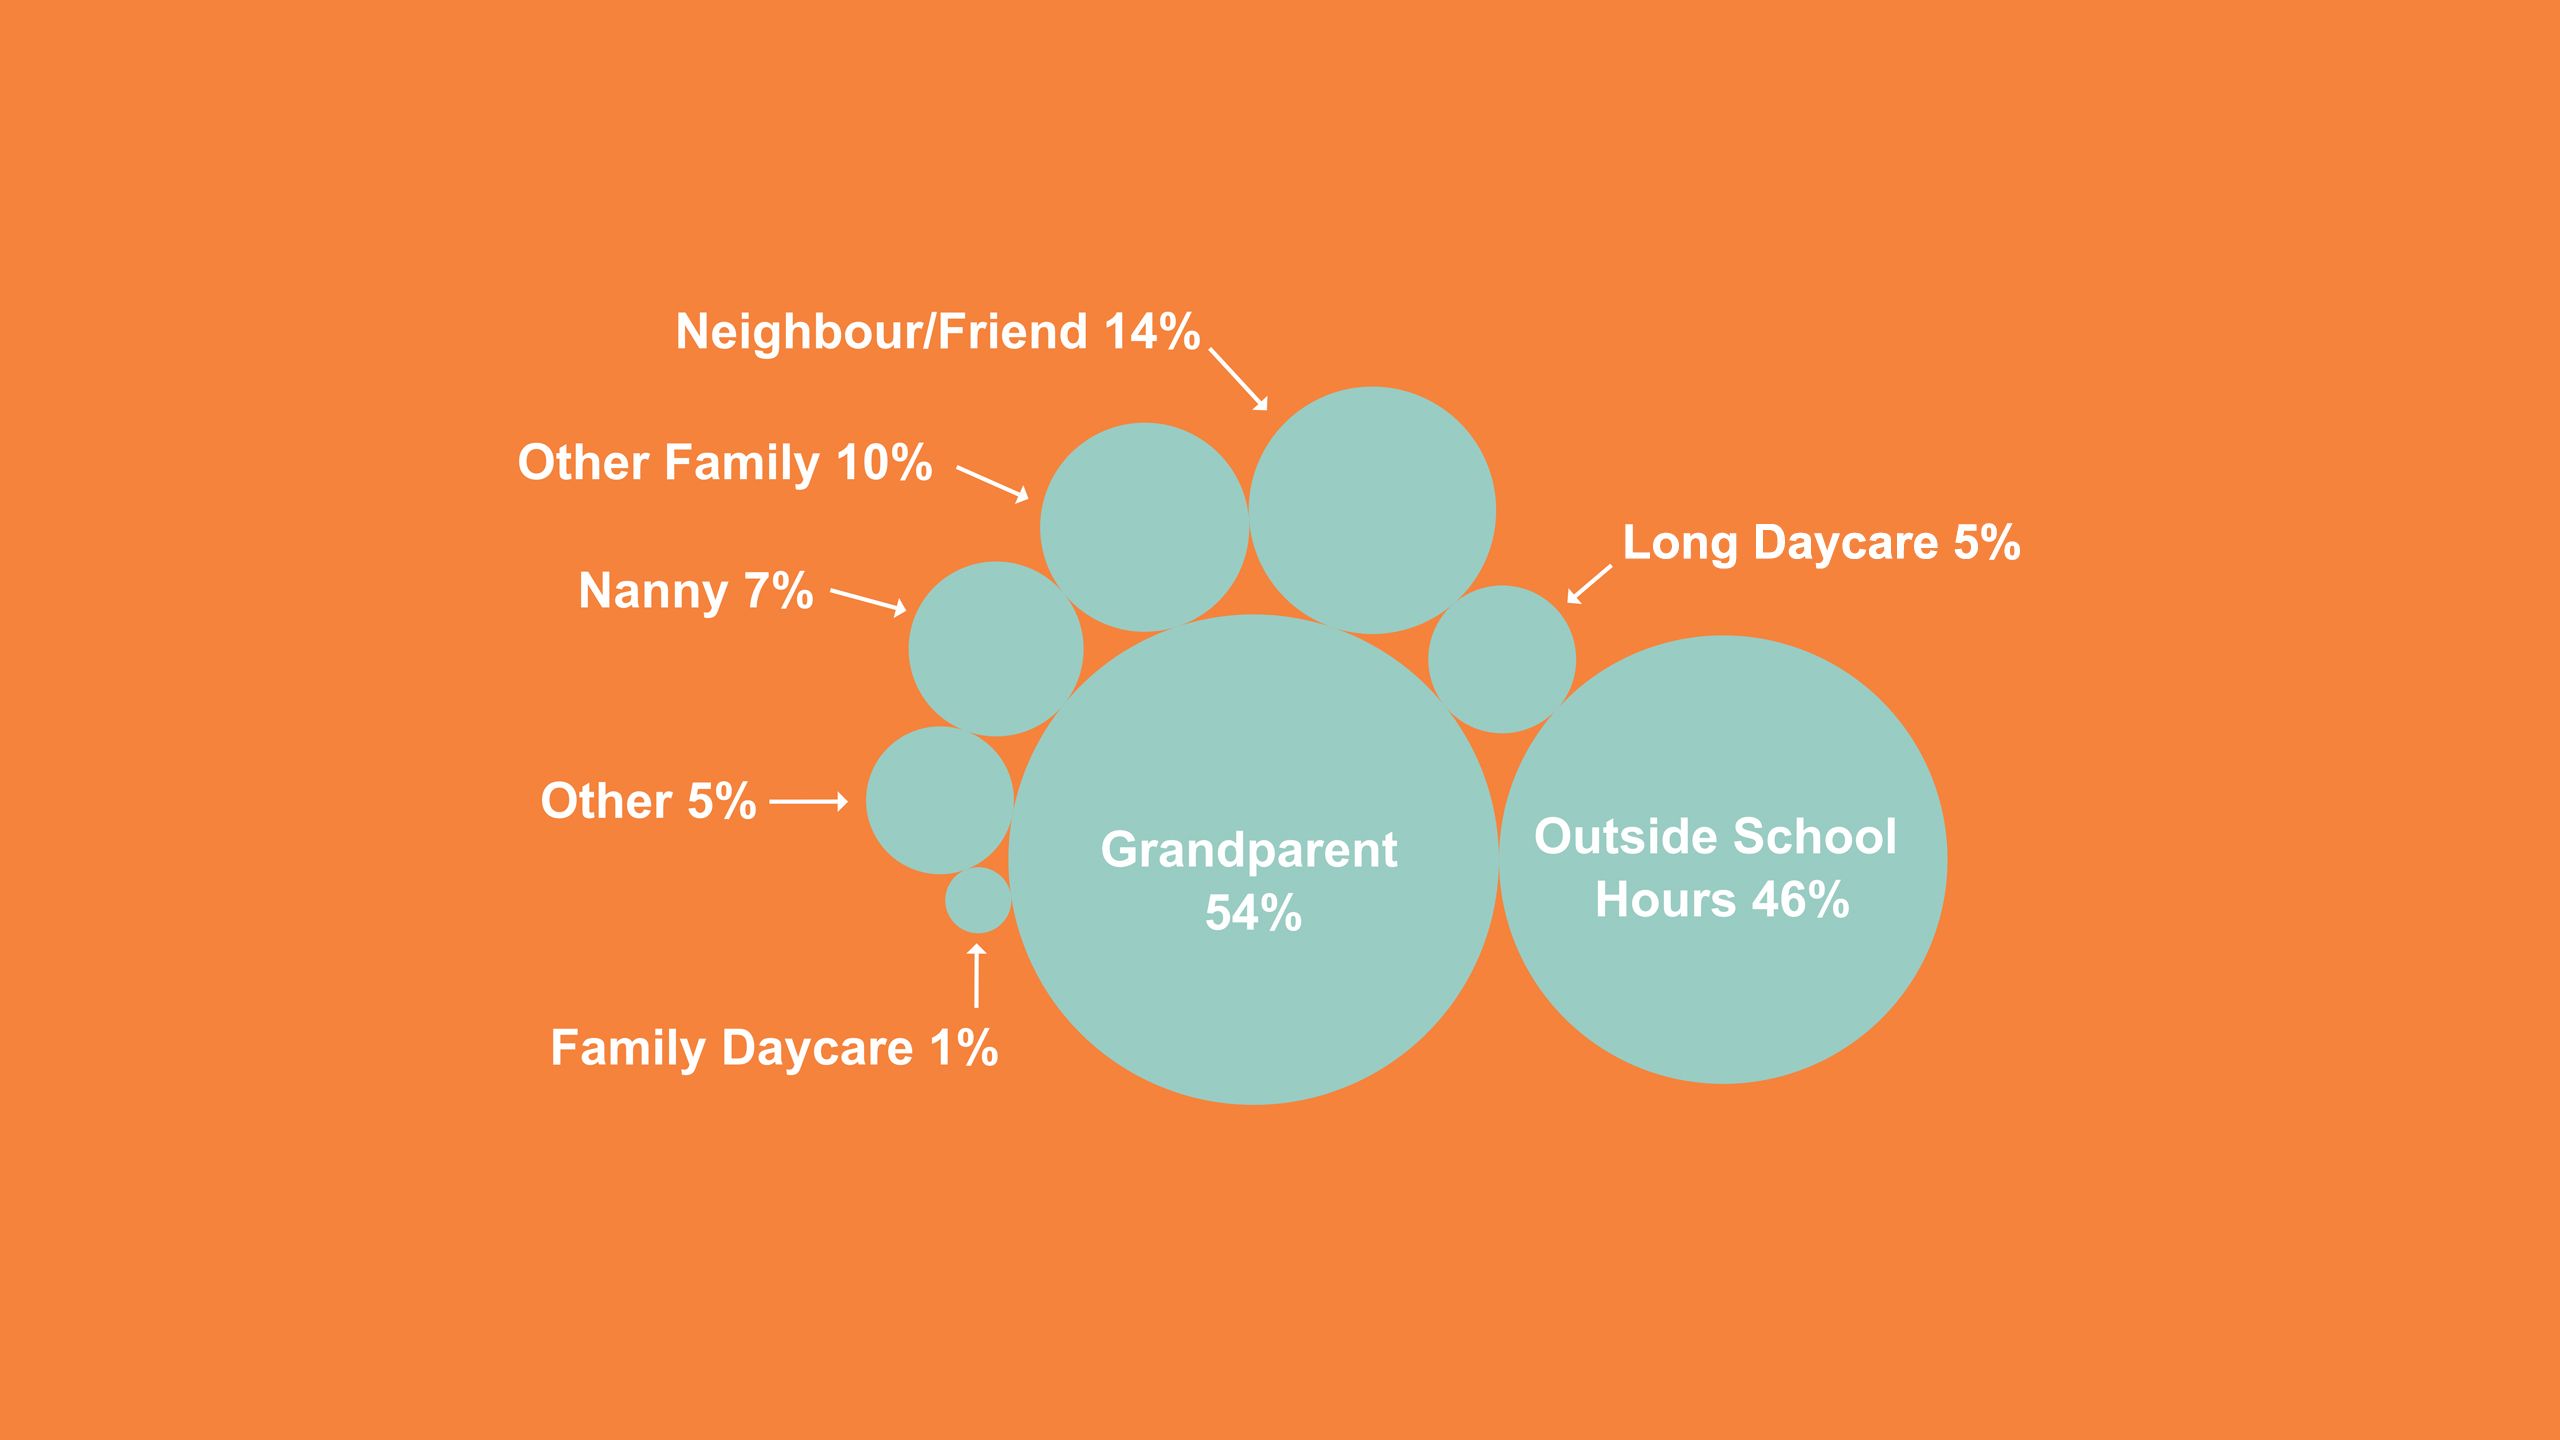 grandparent 54%, outside school hours 46%, neighbour/friend 14%, other family 10%, nanny 7%, long day care 5%, other  5%, family daycare 1%